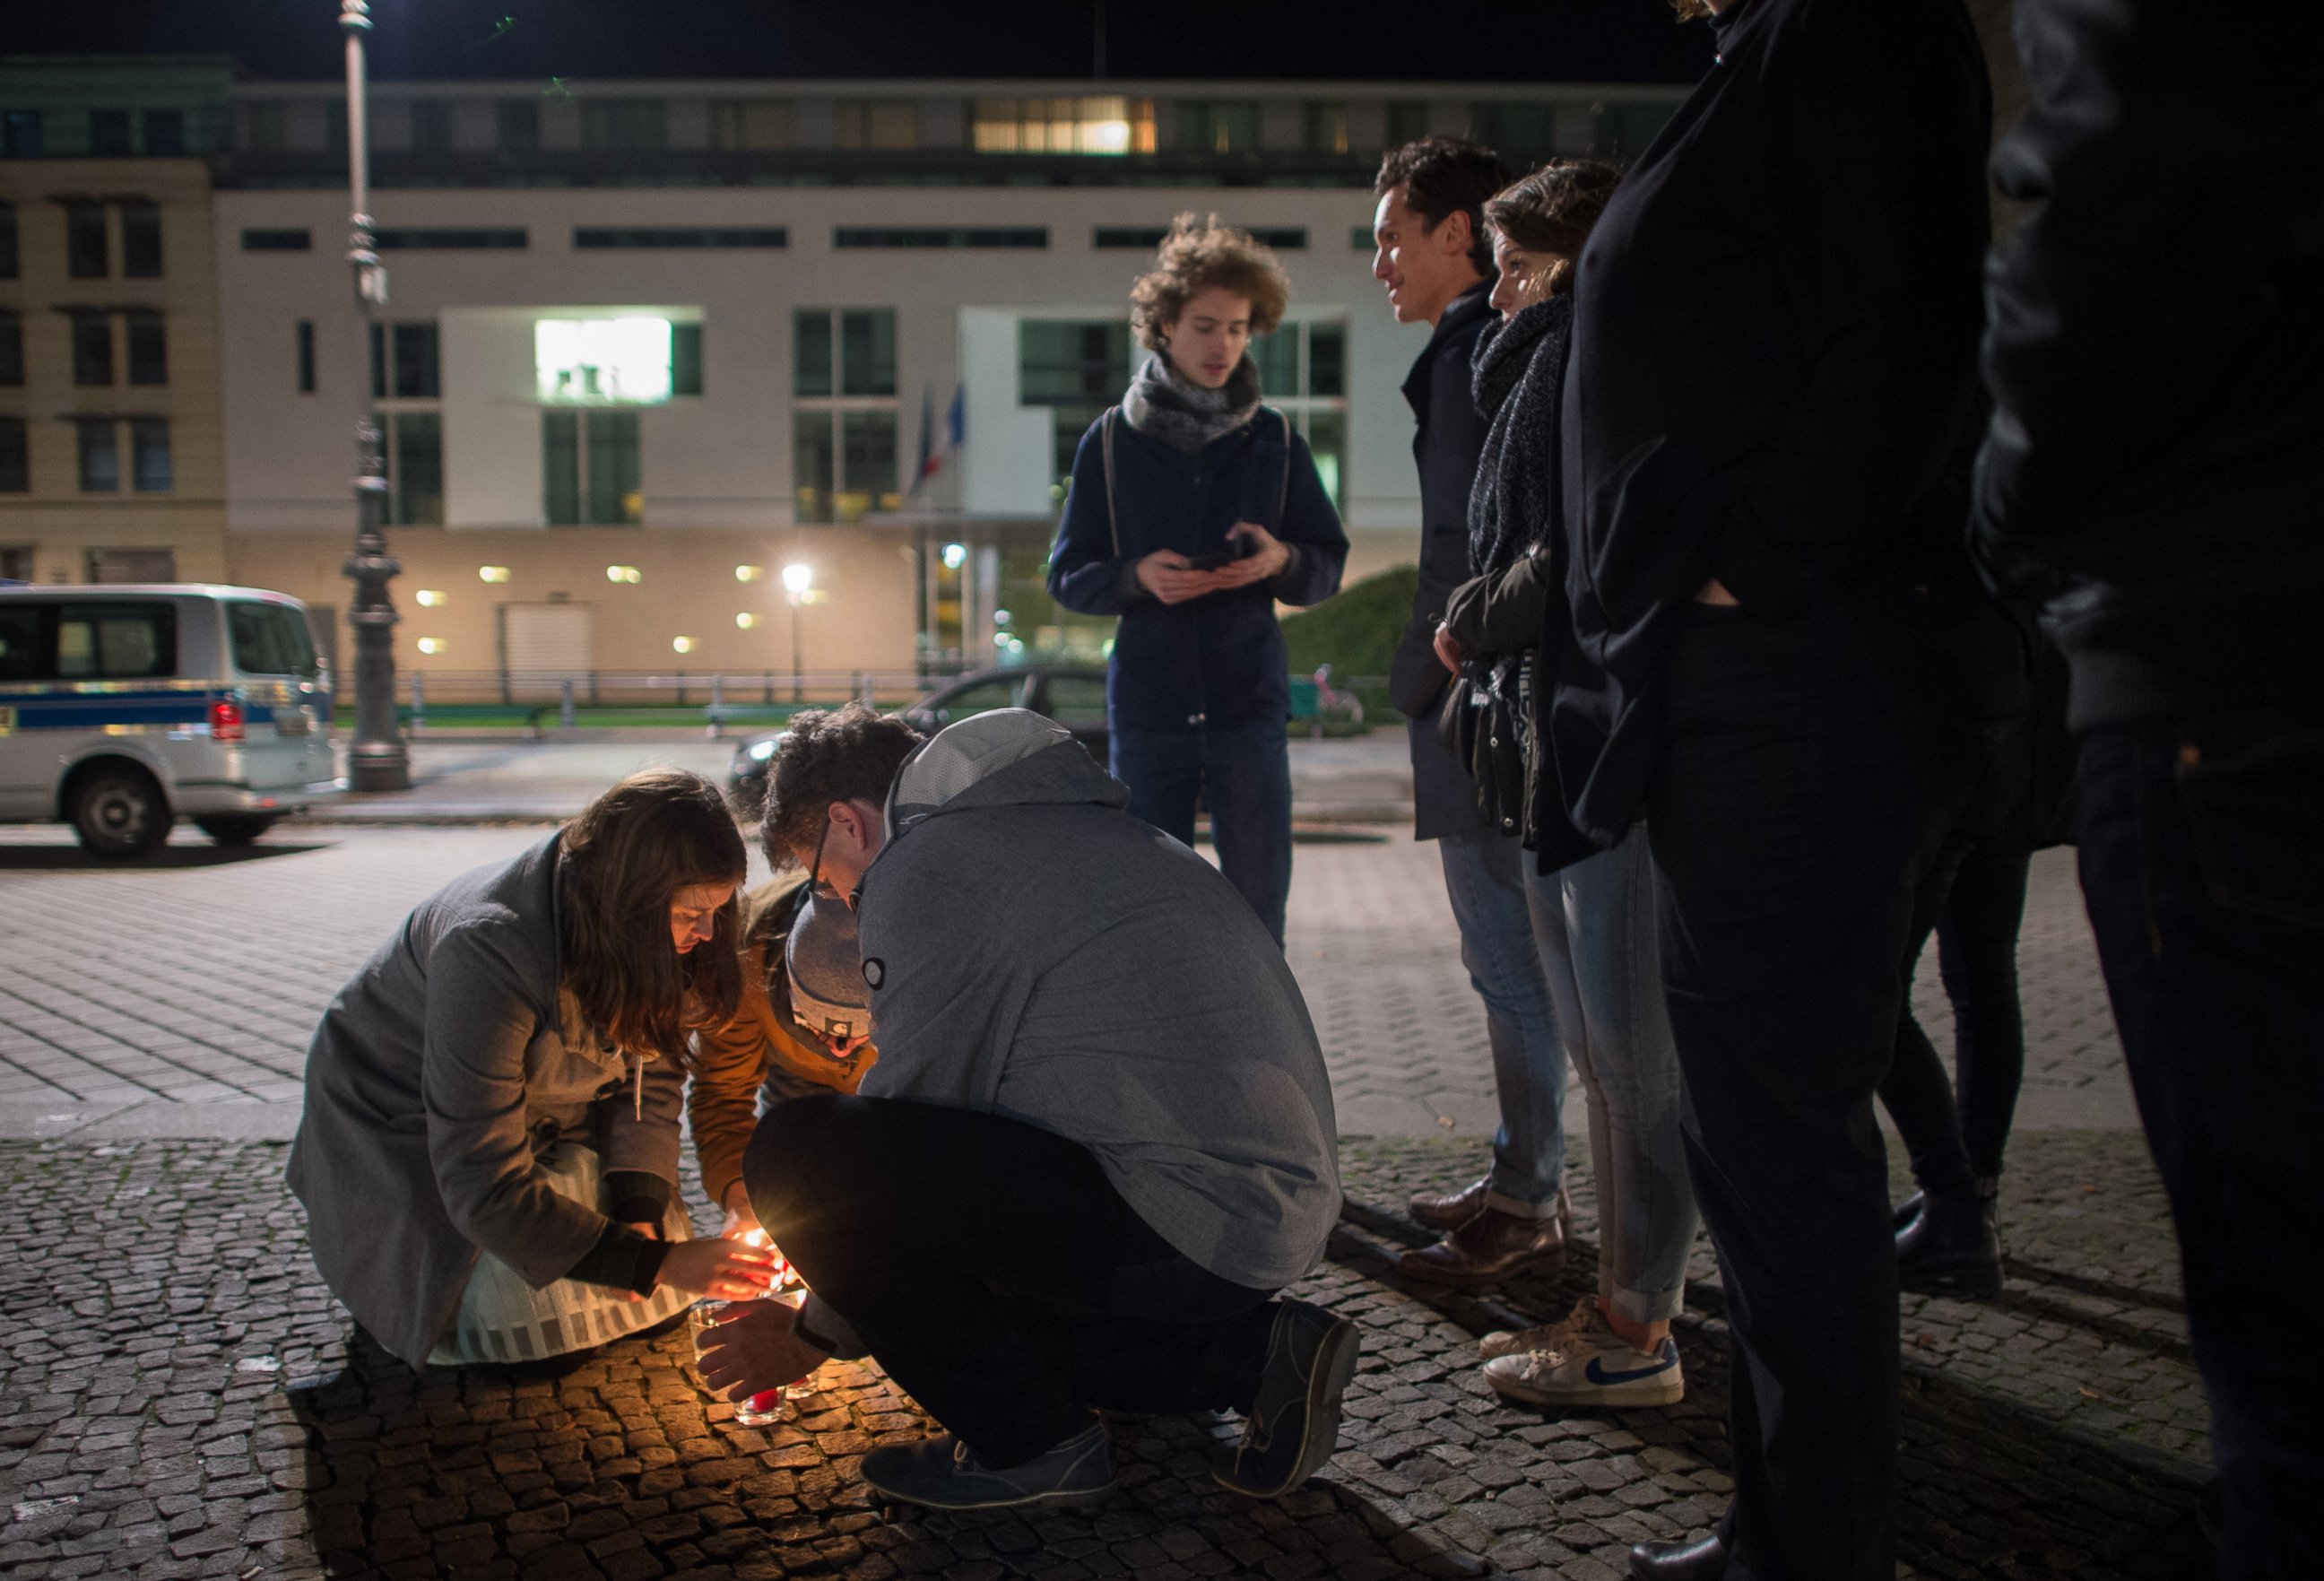 PHOTO: People light candles in tribute to the victims of the Paris attacks outside the French embassy in Berlin on Nov. 13, 2015.